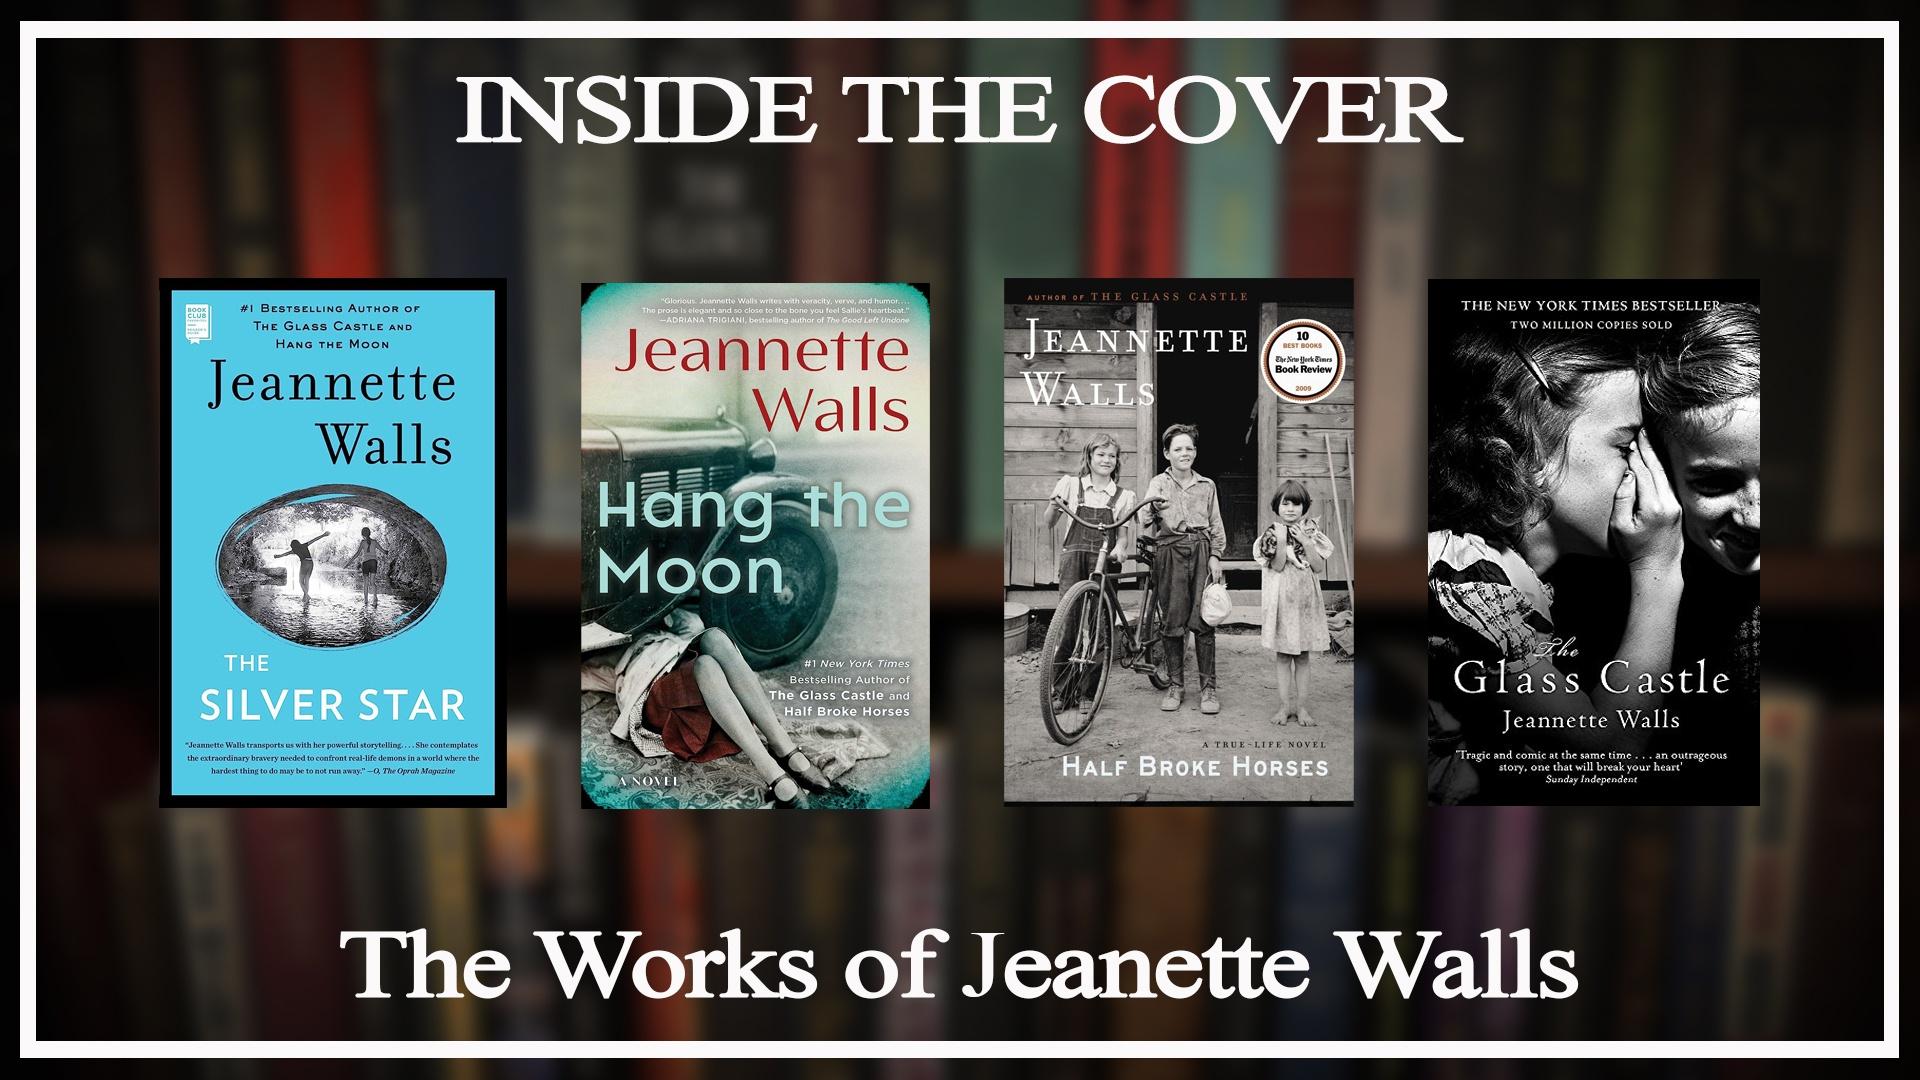 The Works of Jeanette Walls